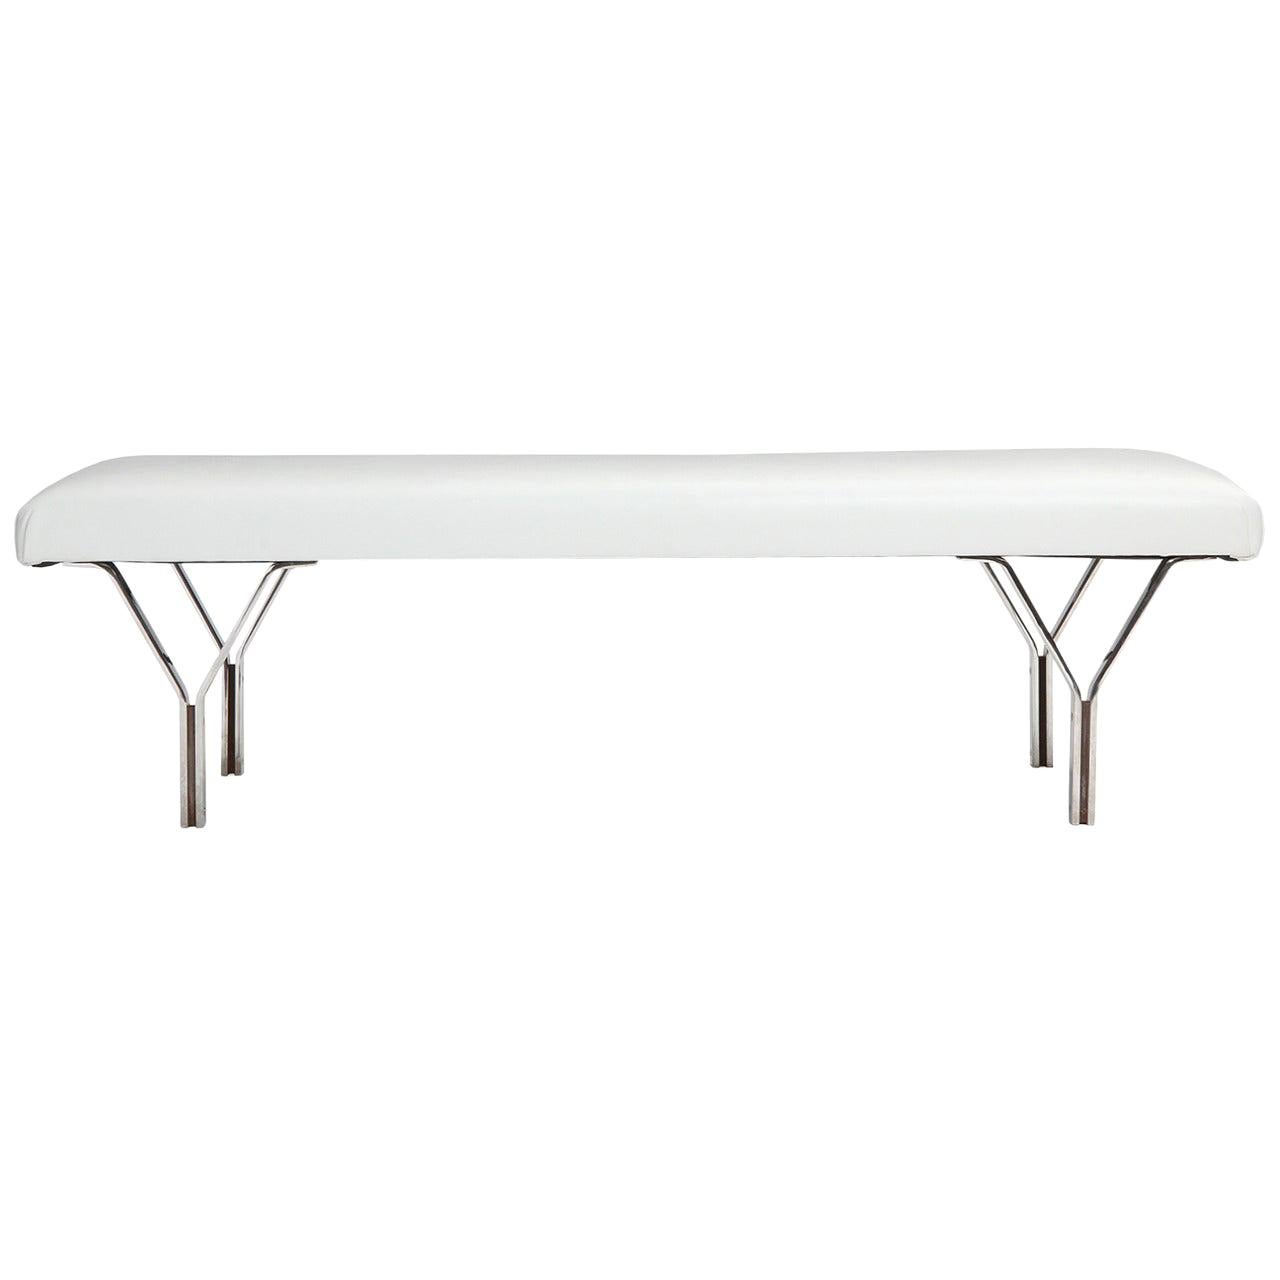 Architectural White Leather Bench